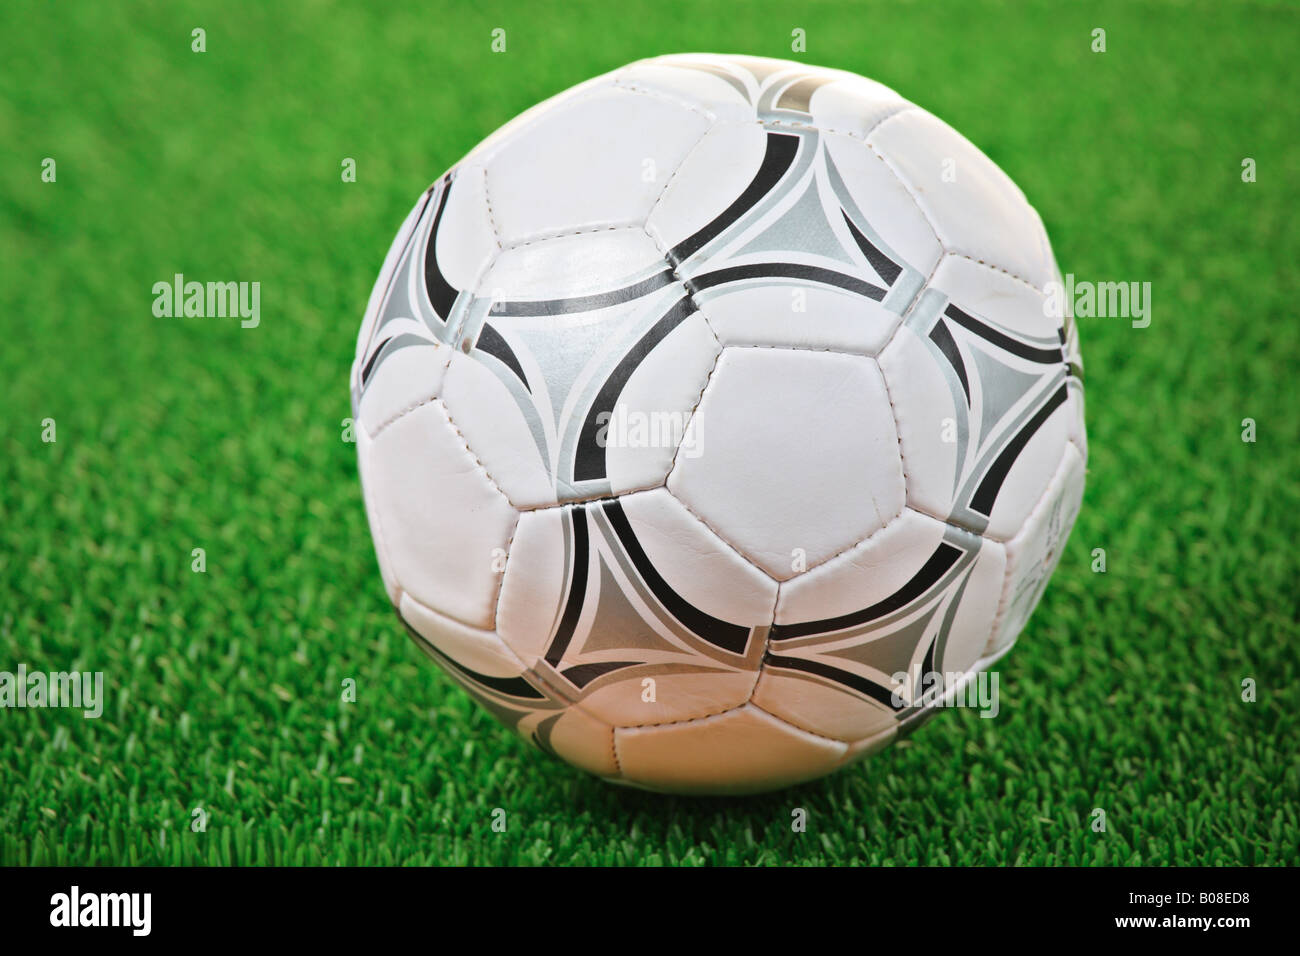 New Soccer Ball High Resolution Stock Photography and Images - Alamy